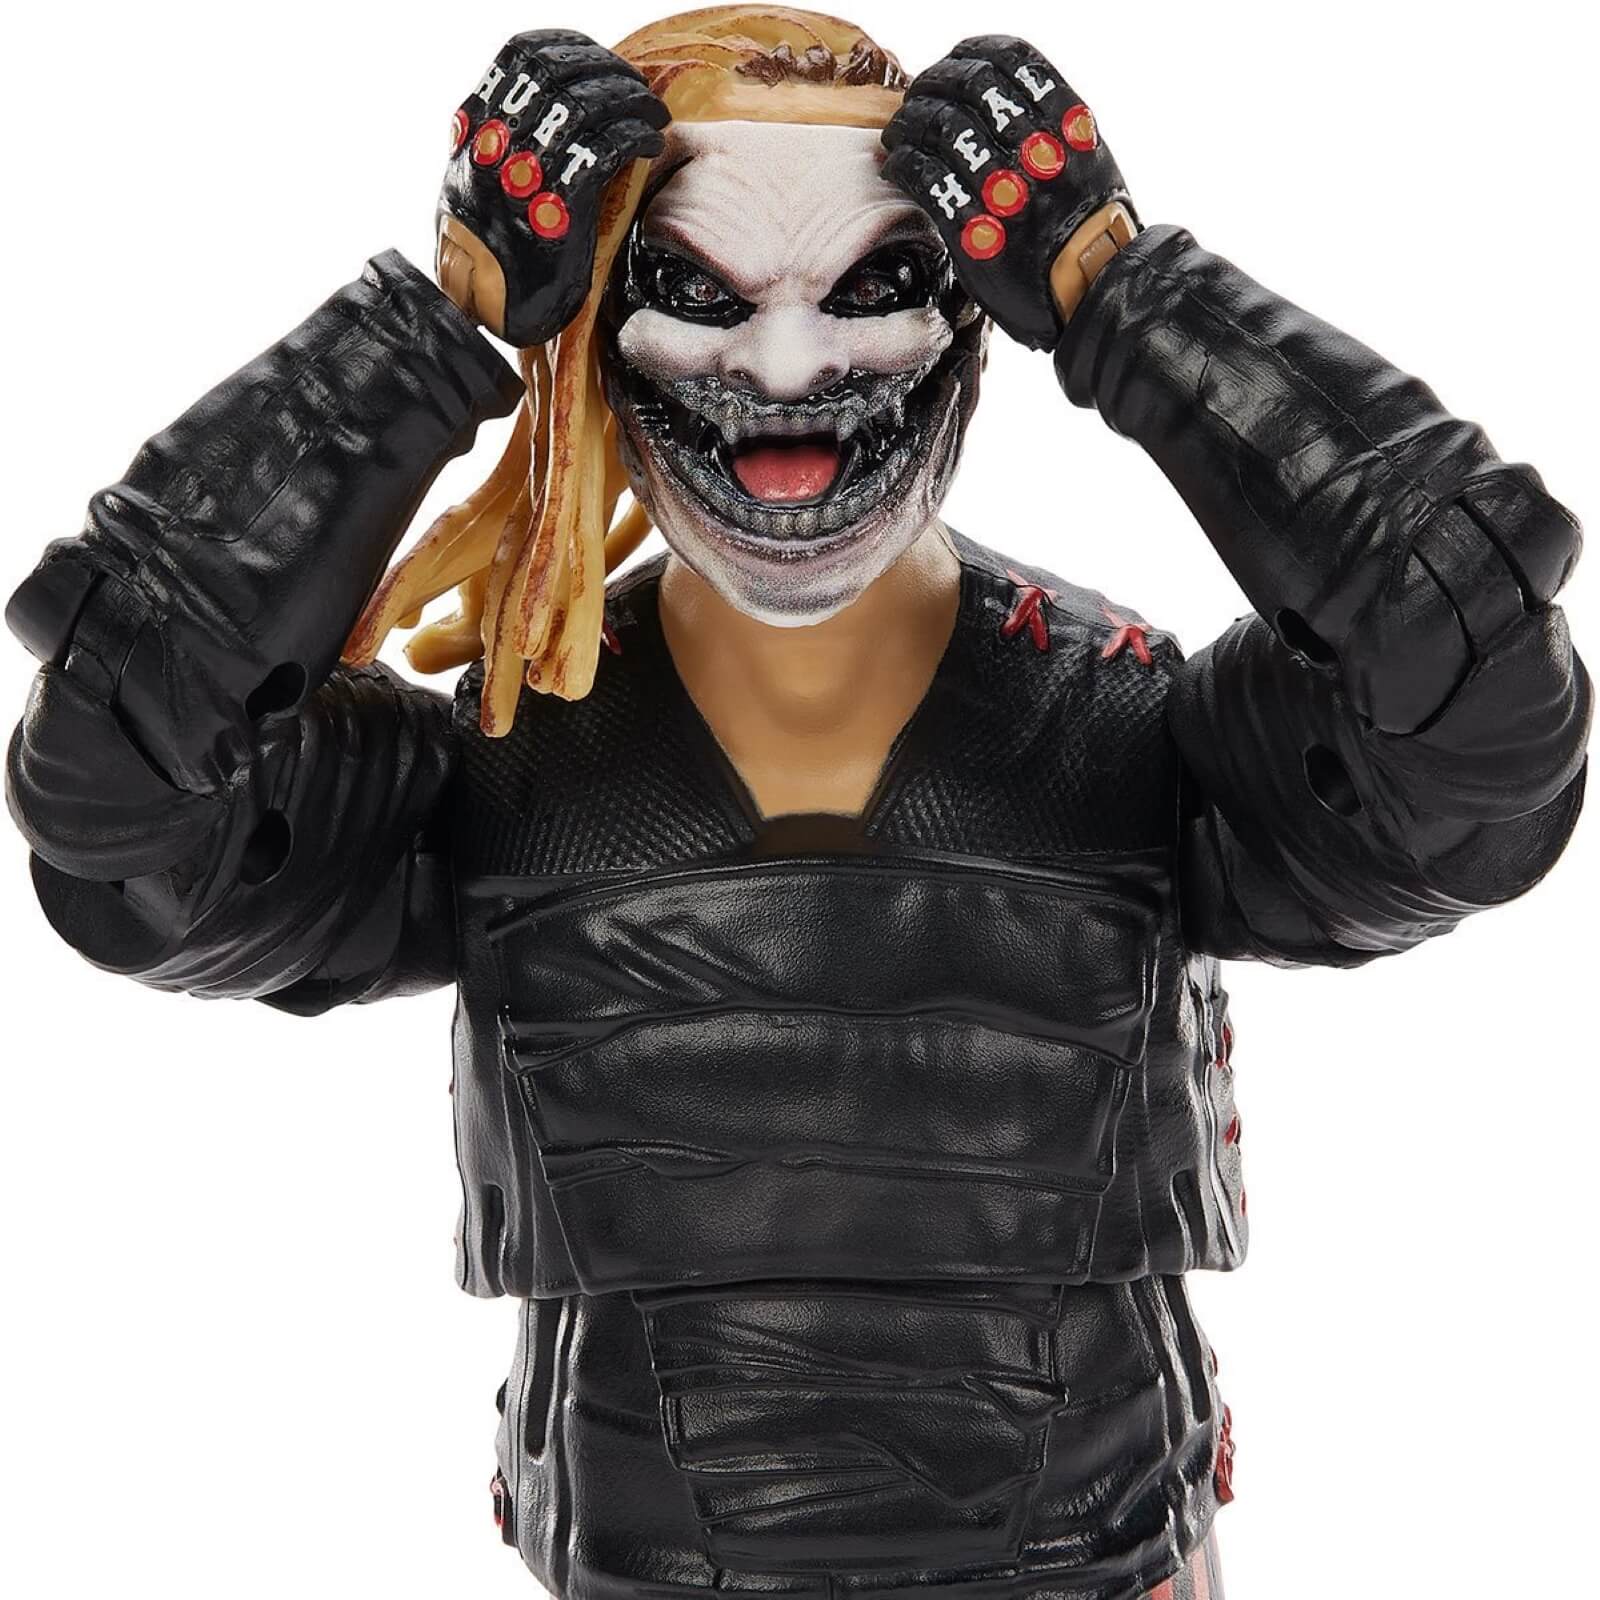 Mattel WWE Ultimate Edition Action Figure - The Fiend